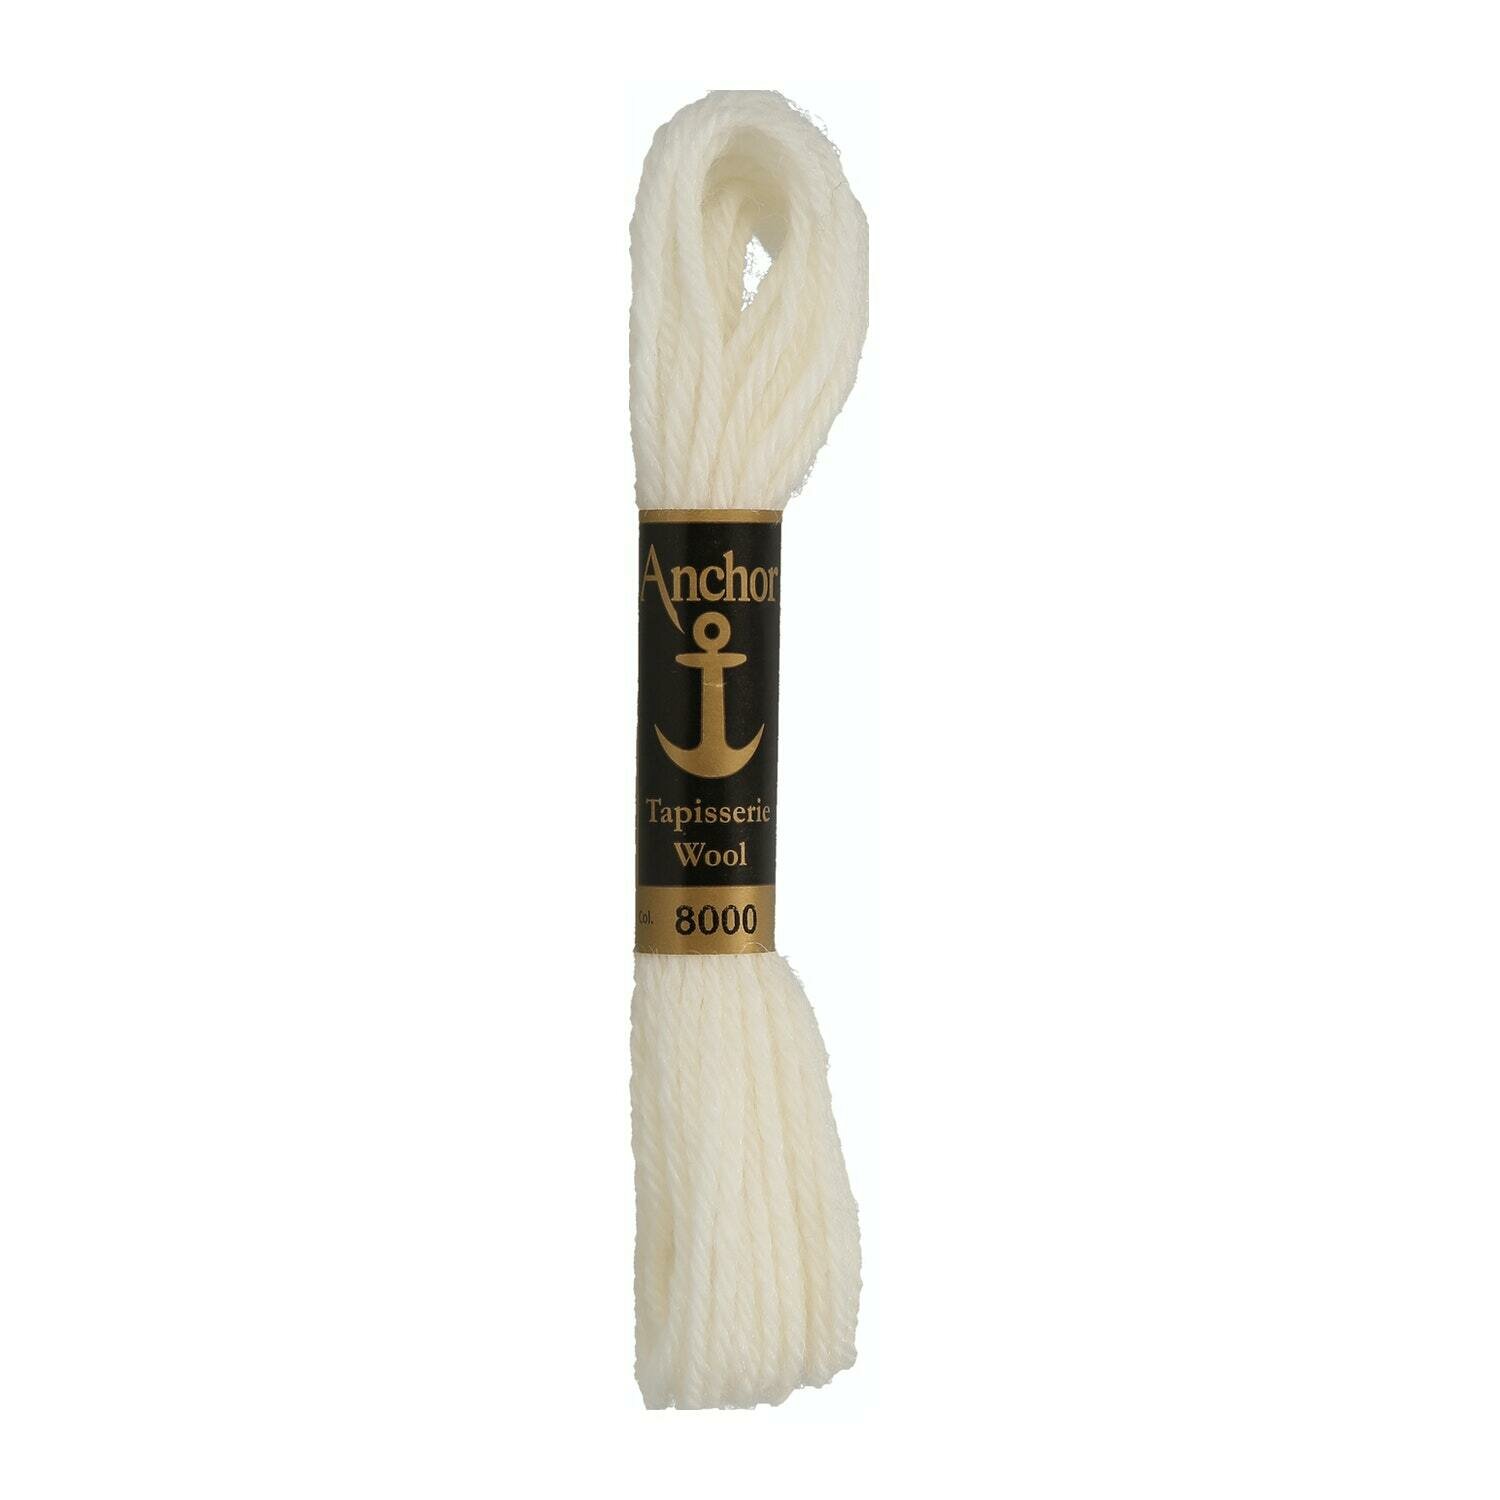 Anchor Tapisserie Wool # 08000